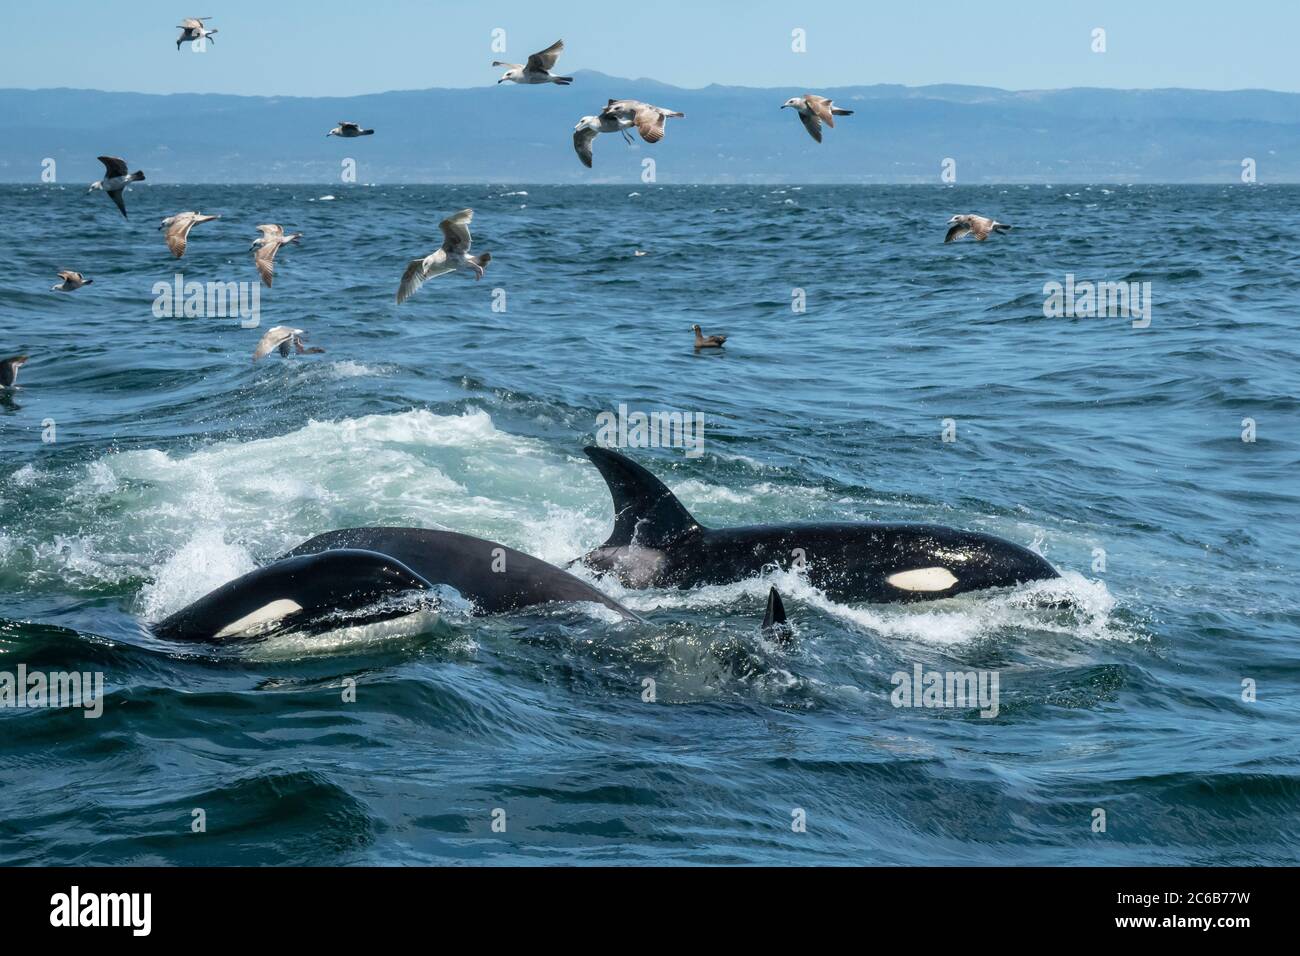 Transient killer whales (Orcinus orca), feeding on a California grey whale calf, Monterey Bay, California, United States of America, North America Stock Photo